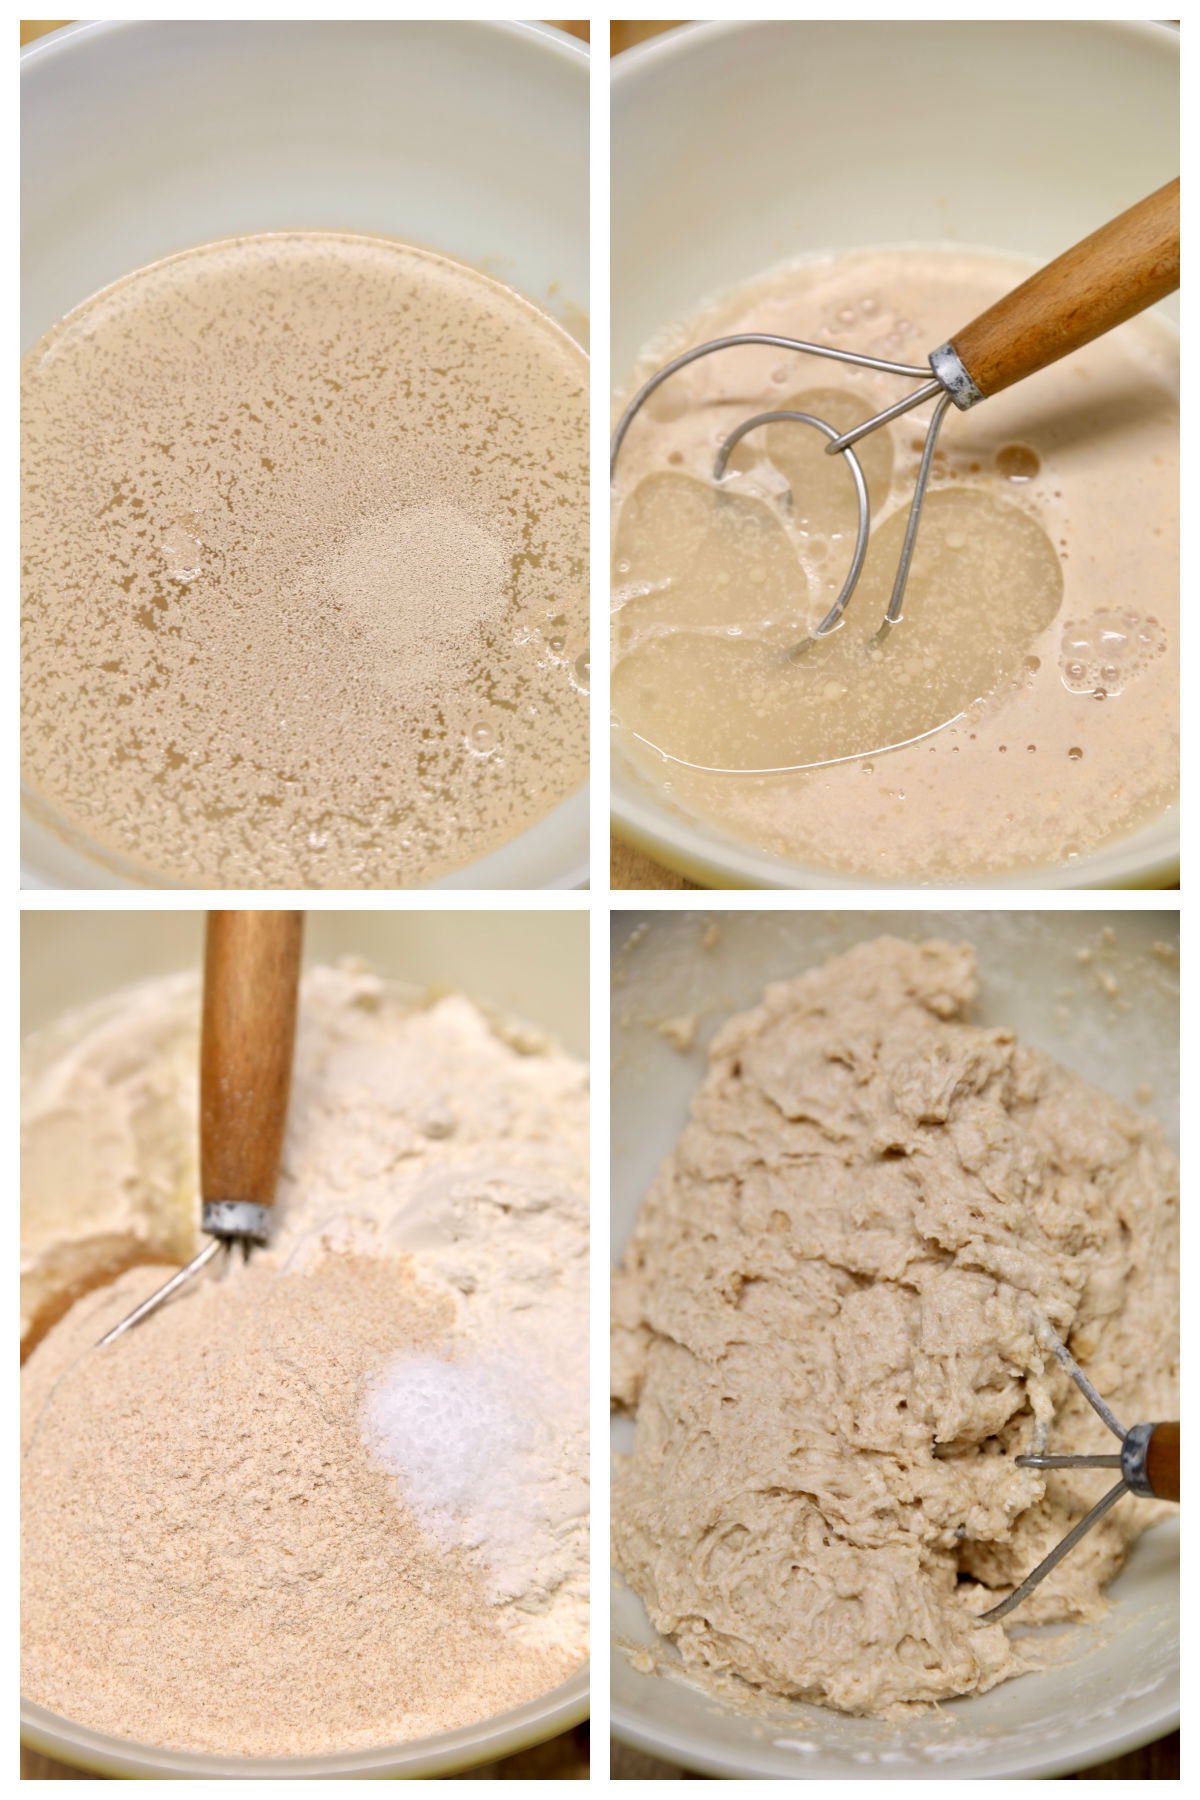 Step by step collage making wheat bread dough.